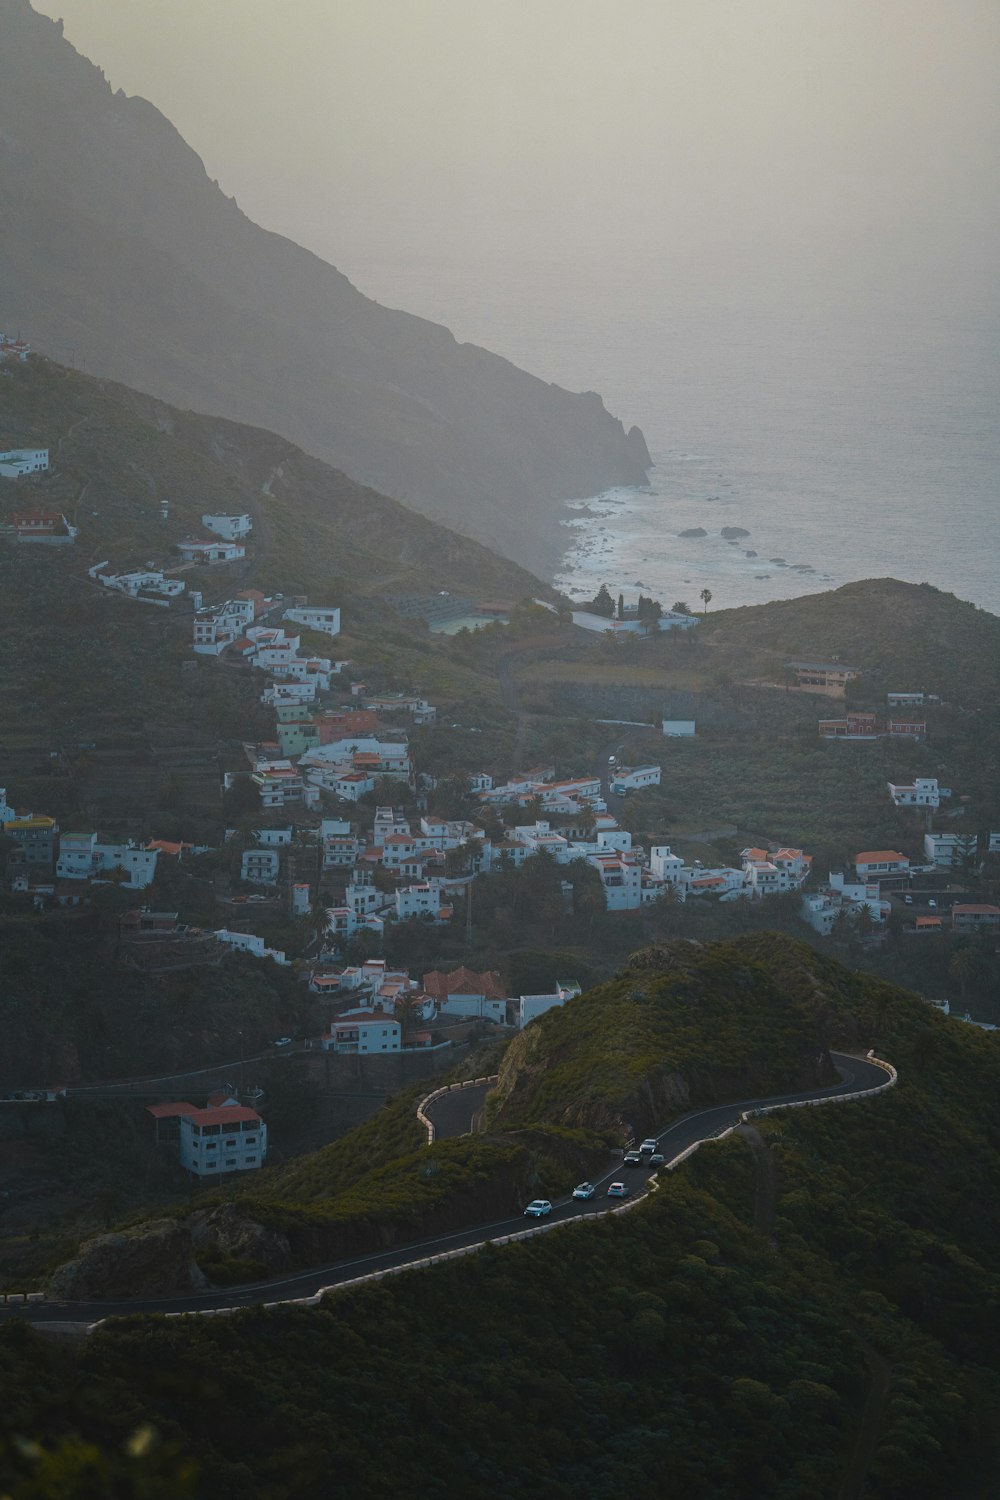 a scenic view of a town on a hill near the ocean